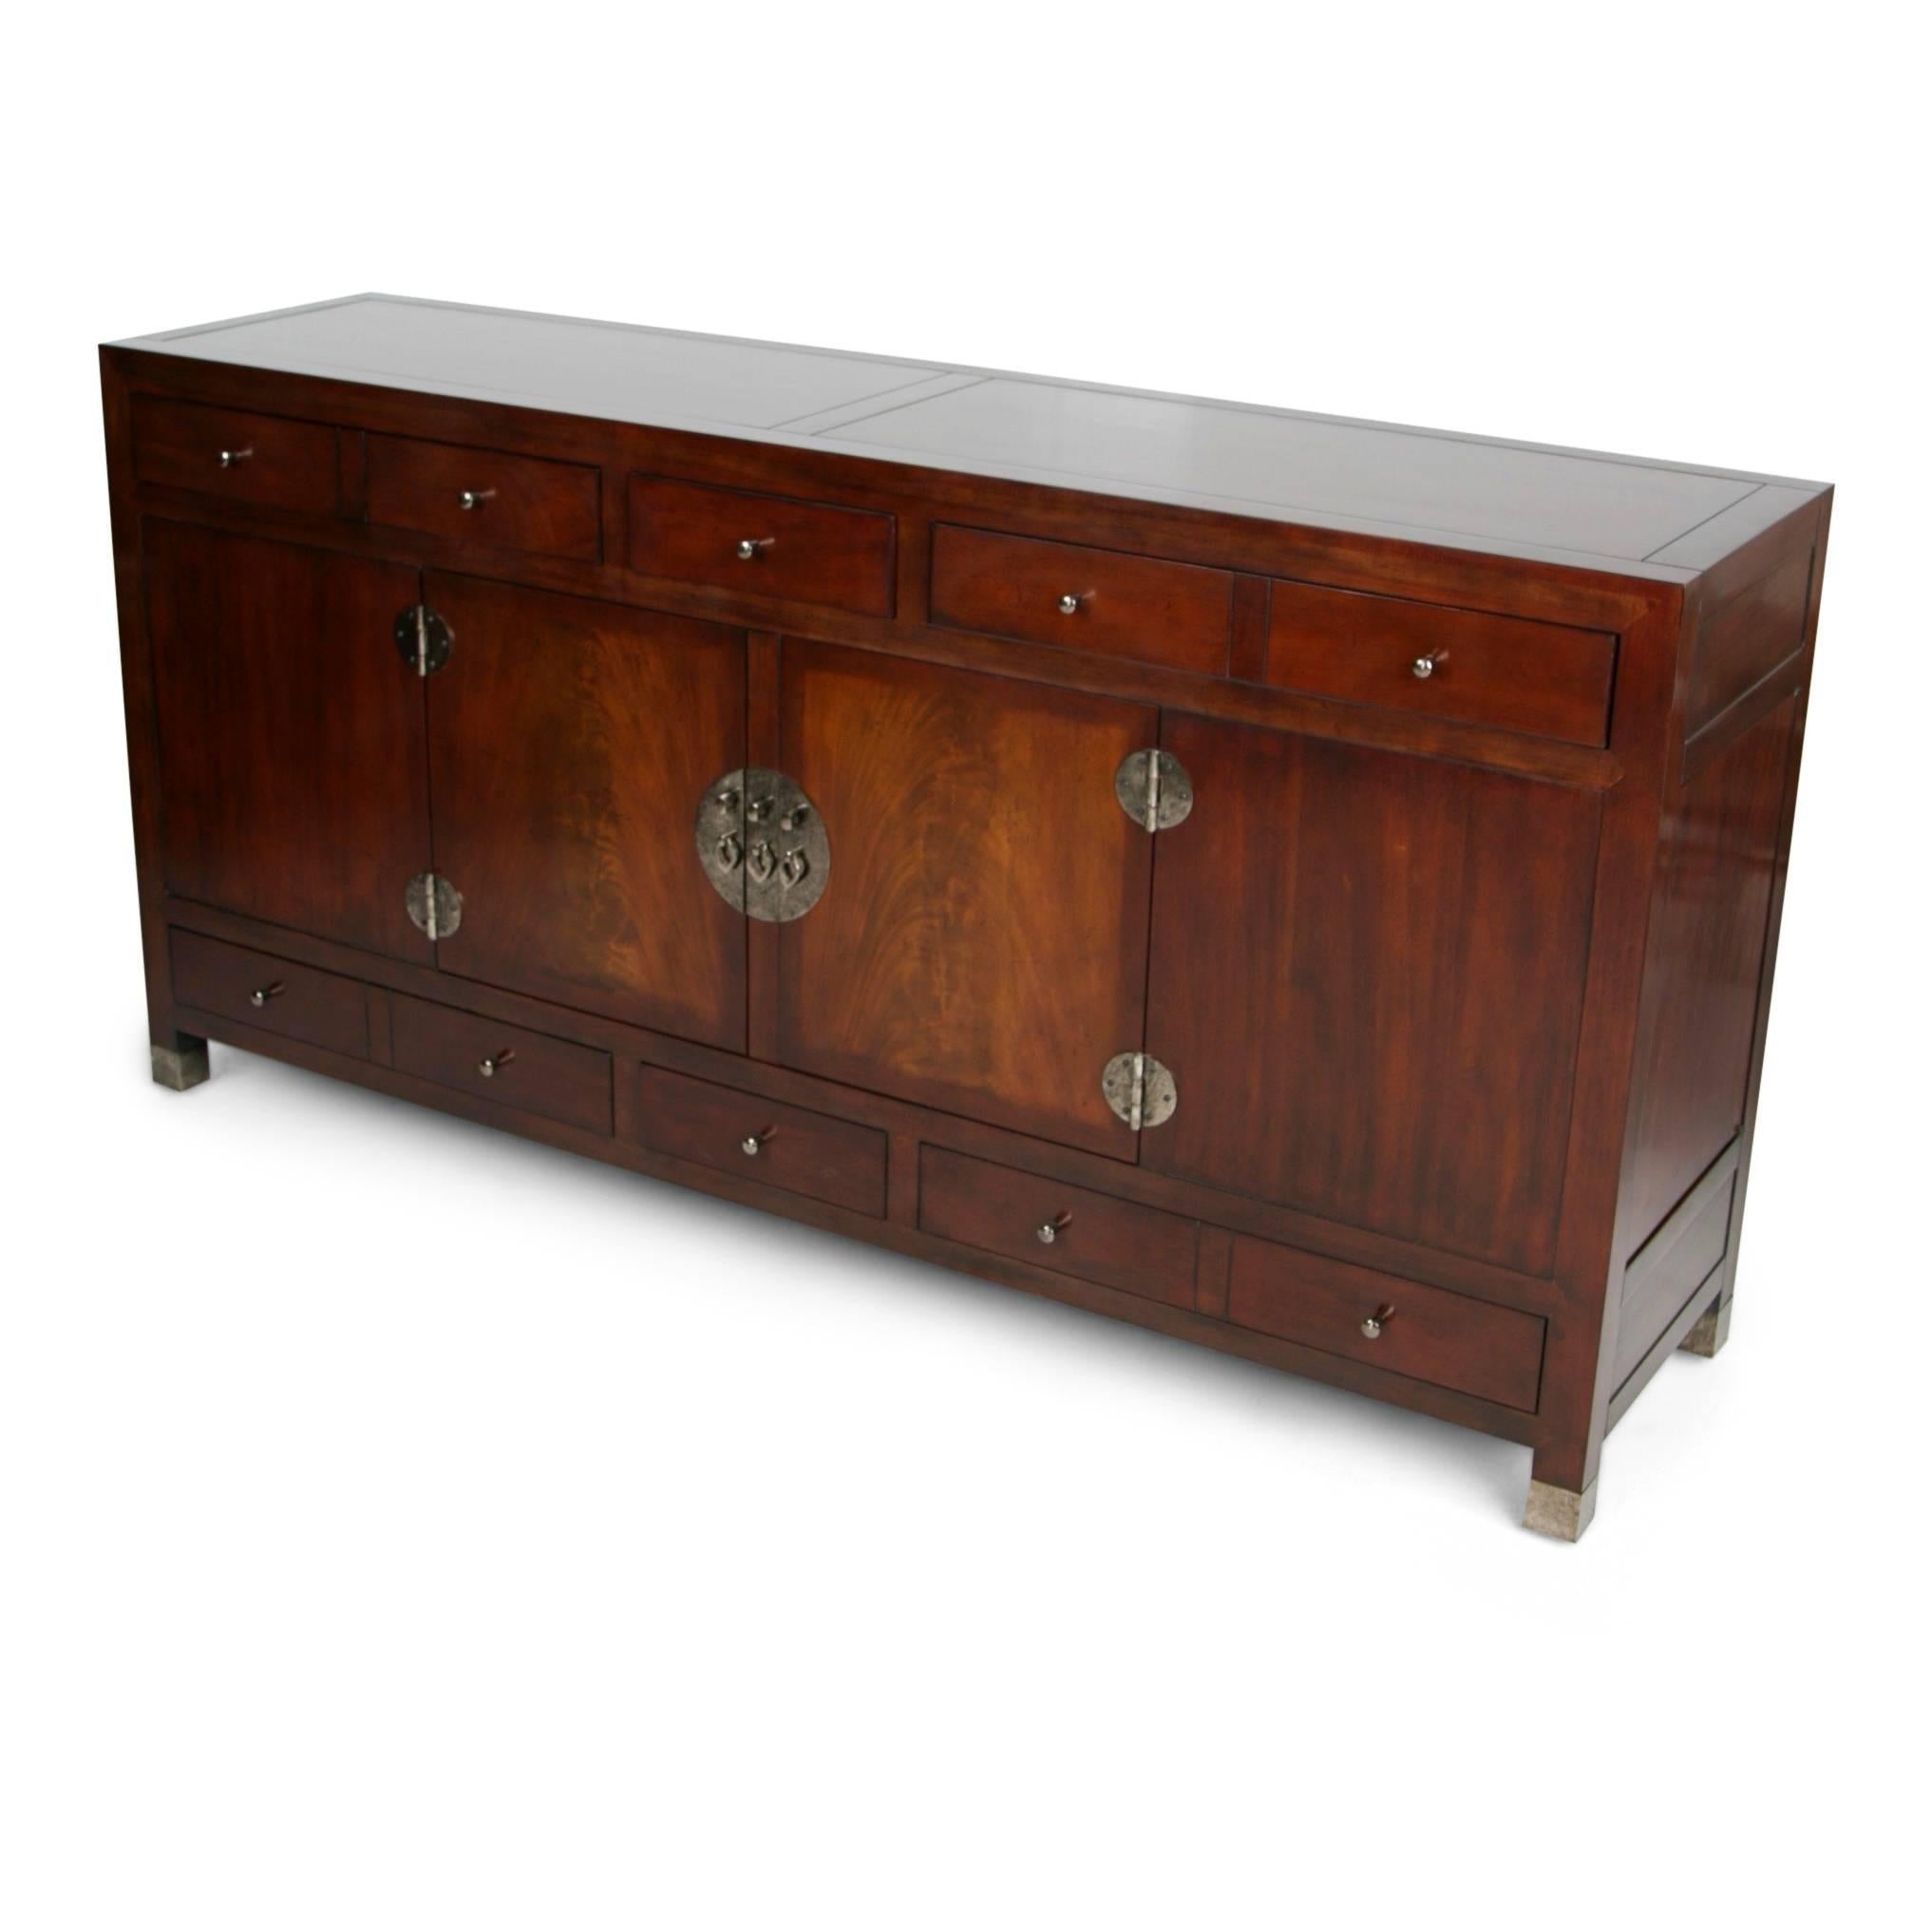 Mid-Century Modern Signed Baker Milling Road Mahogany Ming Sideboard with Hidden Compartments